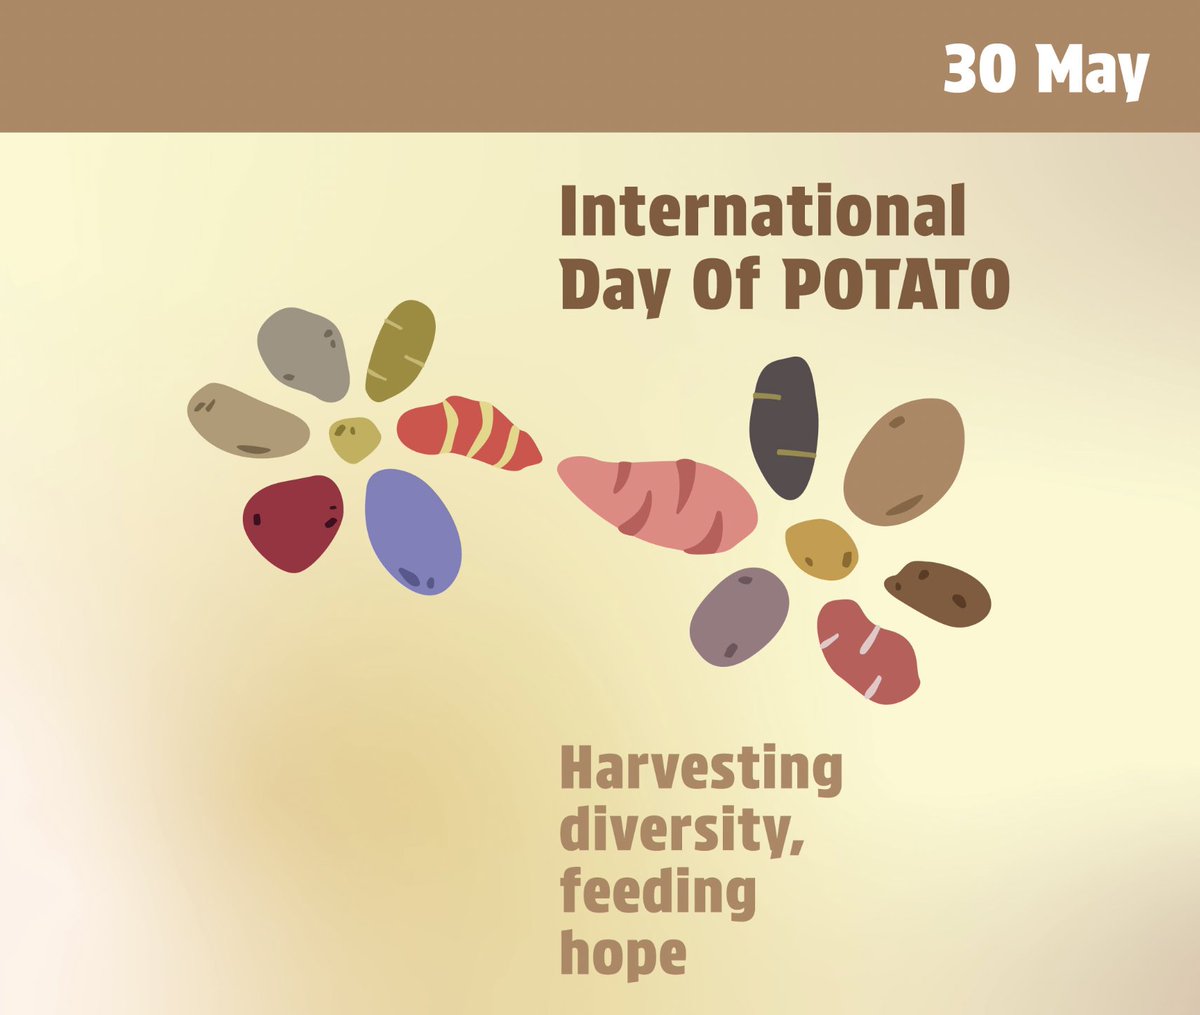 Today we mark the first-ever #InternationalDayOfPotato 🥔 Let's be reminded that #Potatoes are: 🔹an invaluable food resource 🔹consumed by two-thirds of the global population 🔹planted in 159 countries, with around 5,000 varieties Let's recognize the potential of the potato to